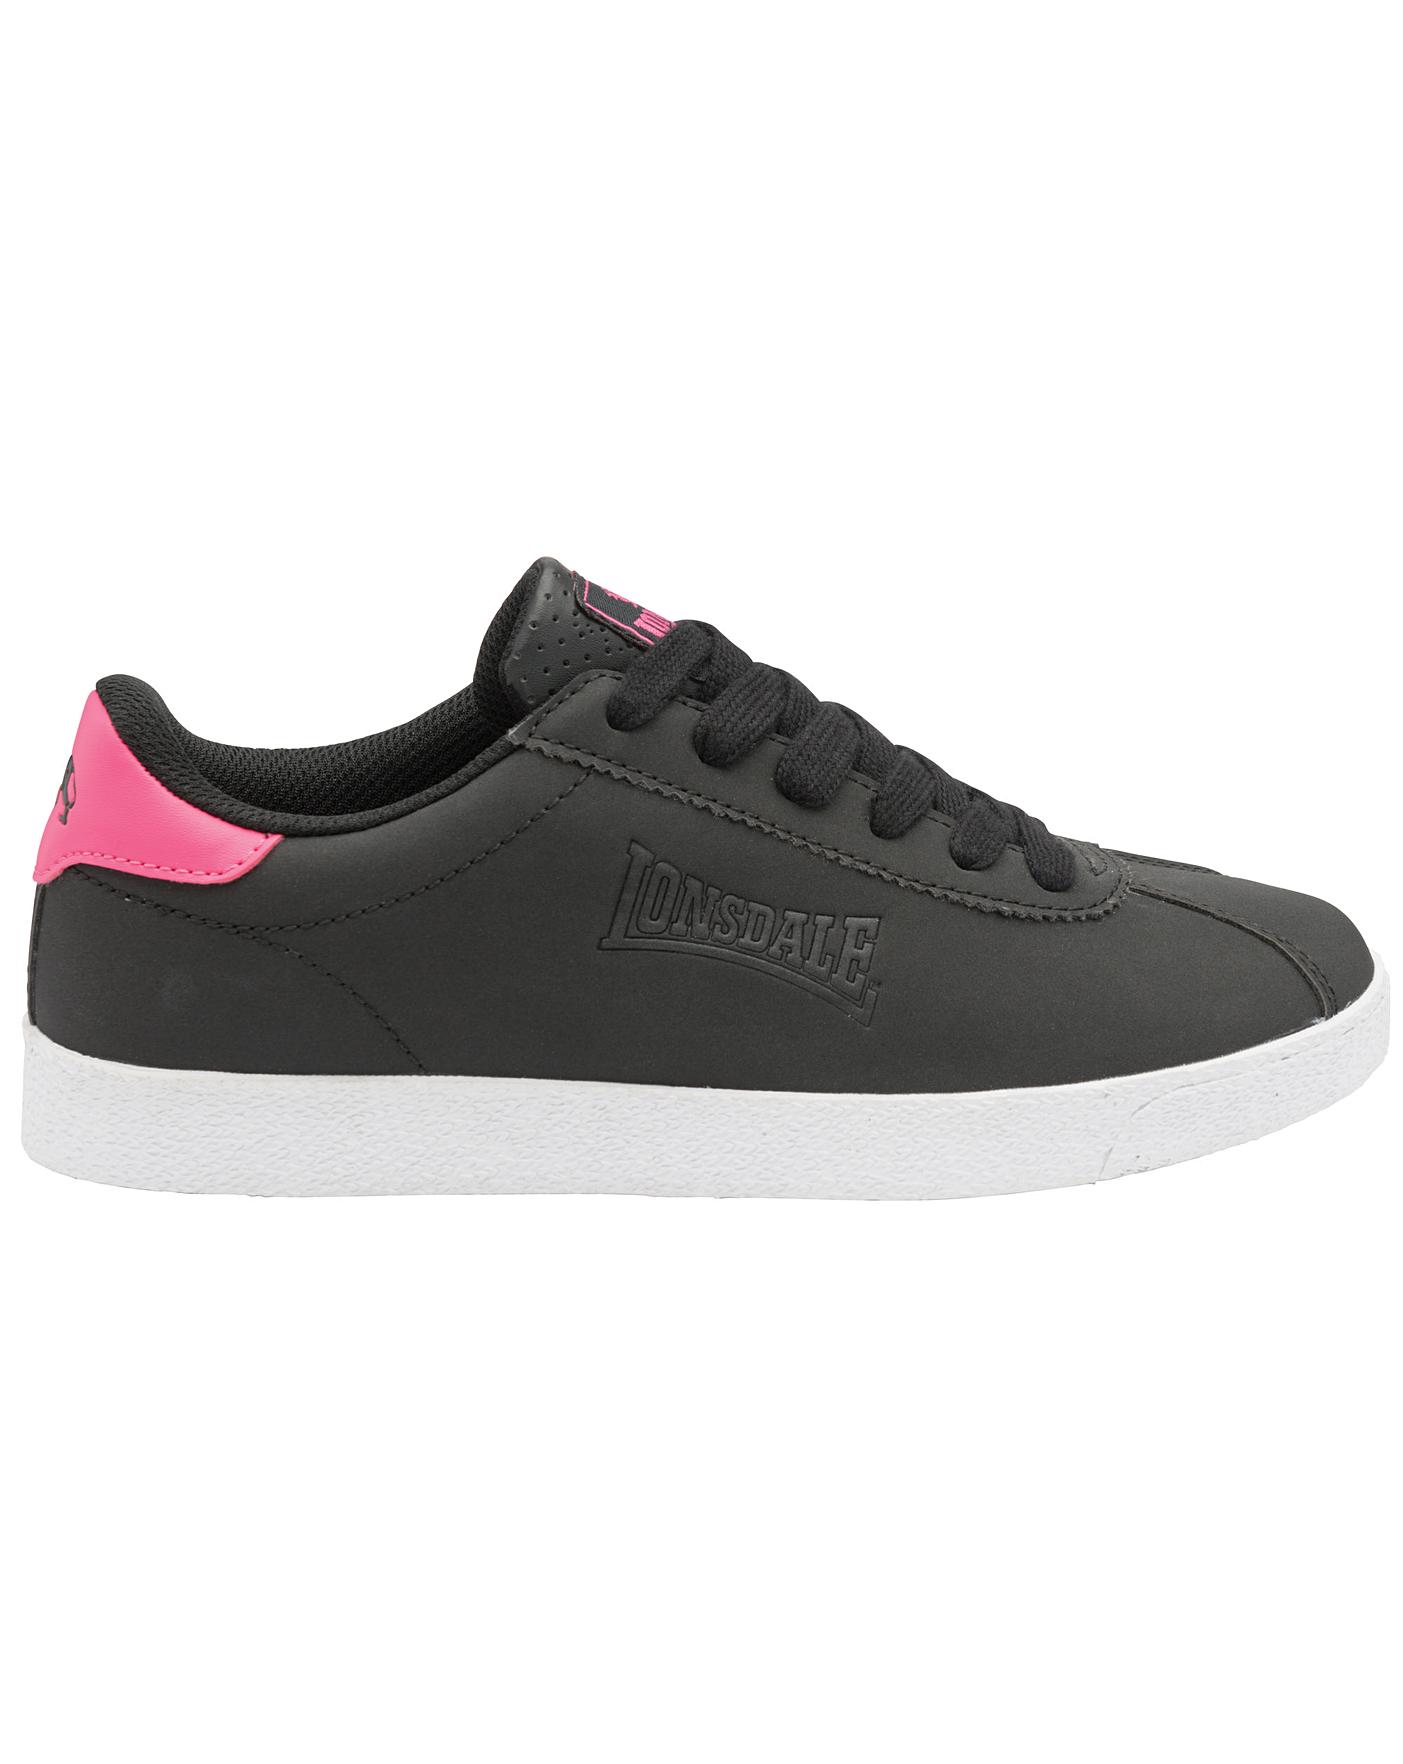 pink lonsdale trainers